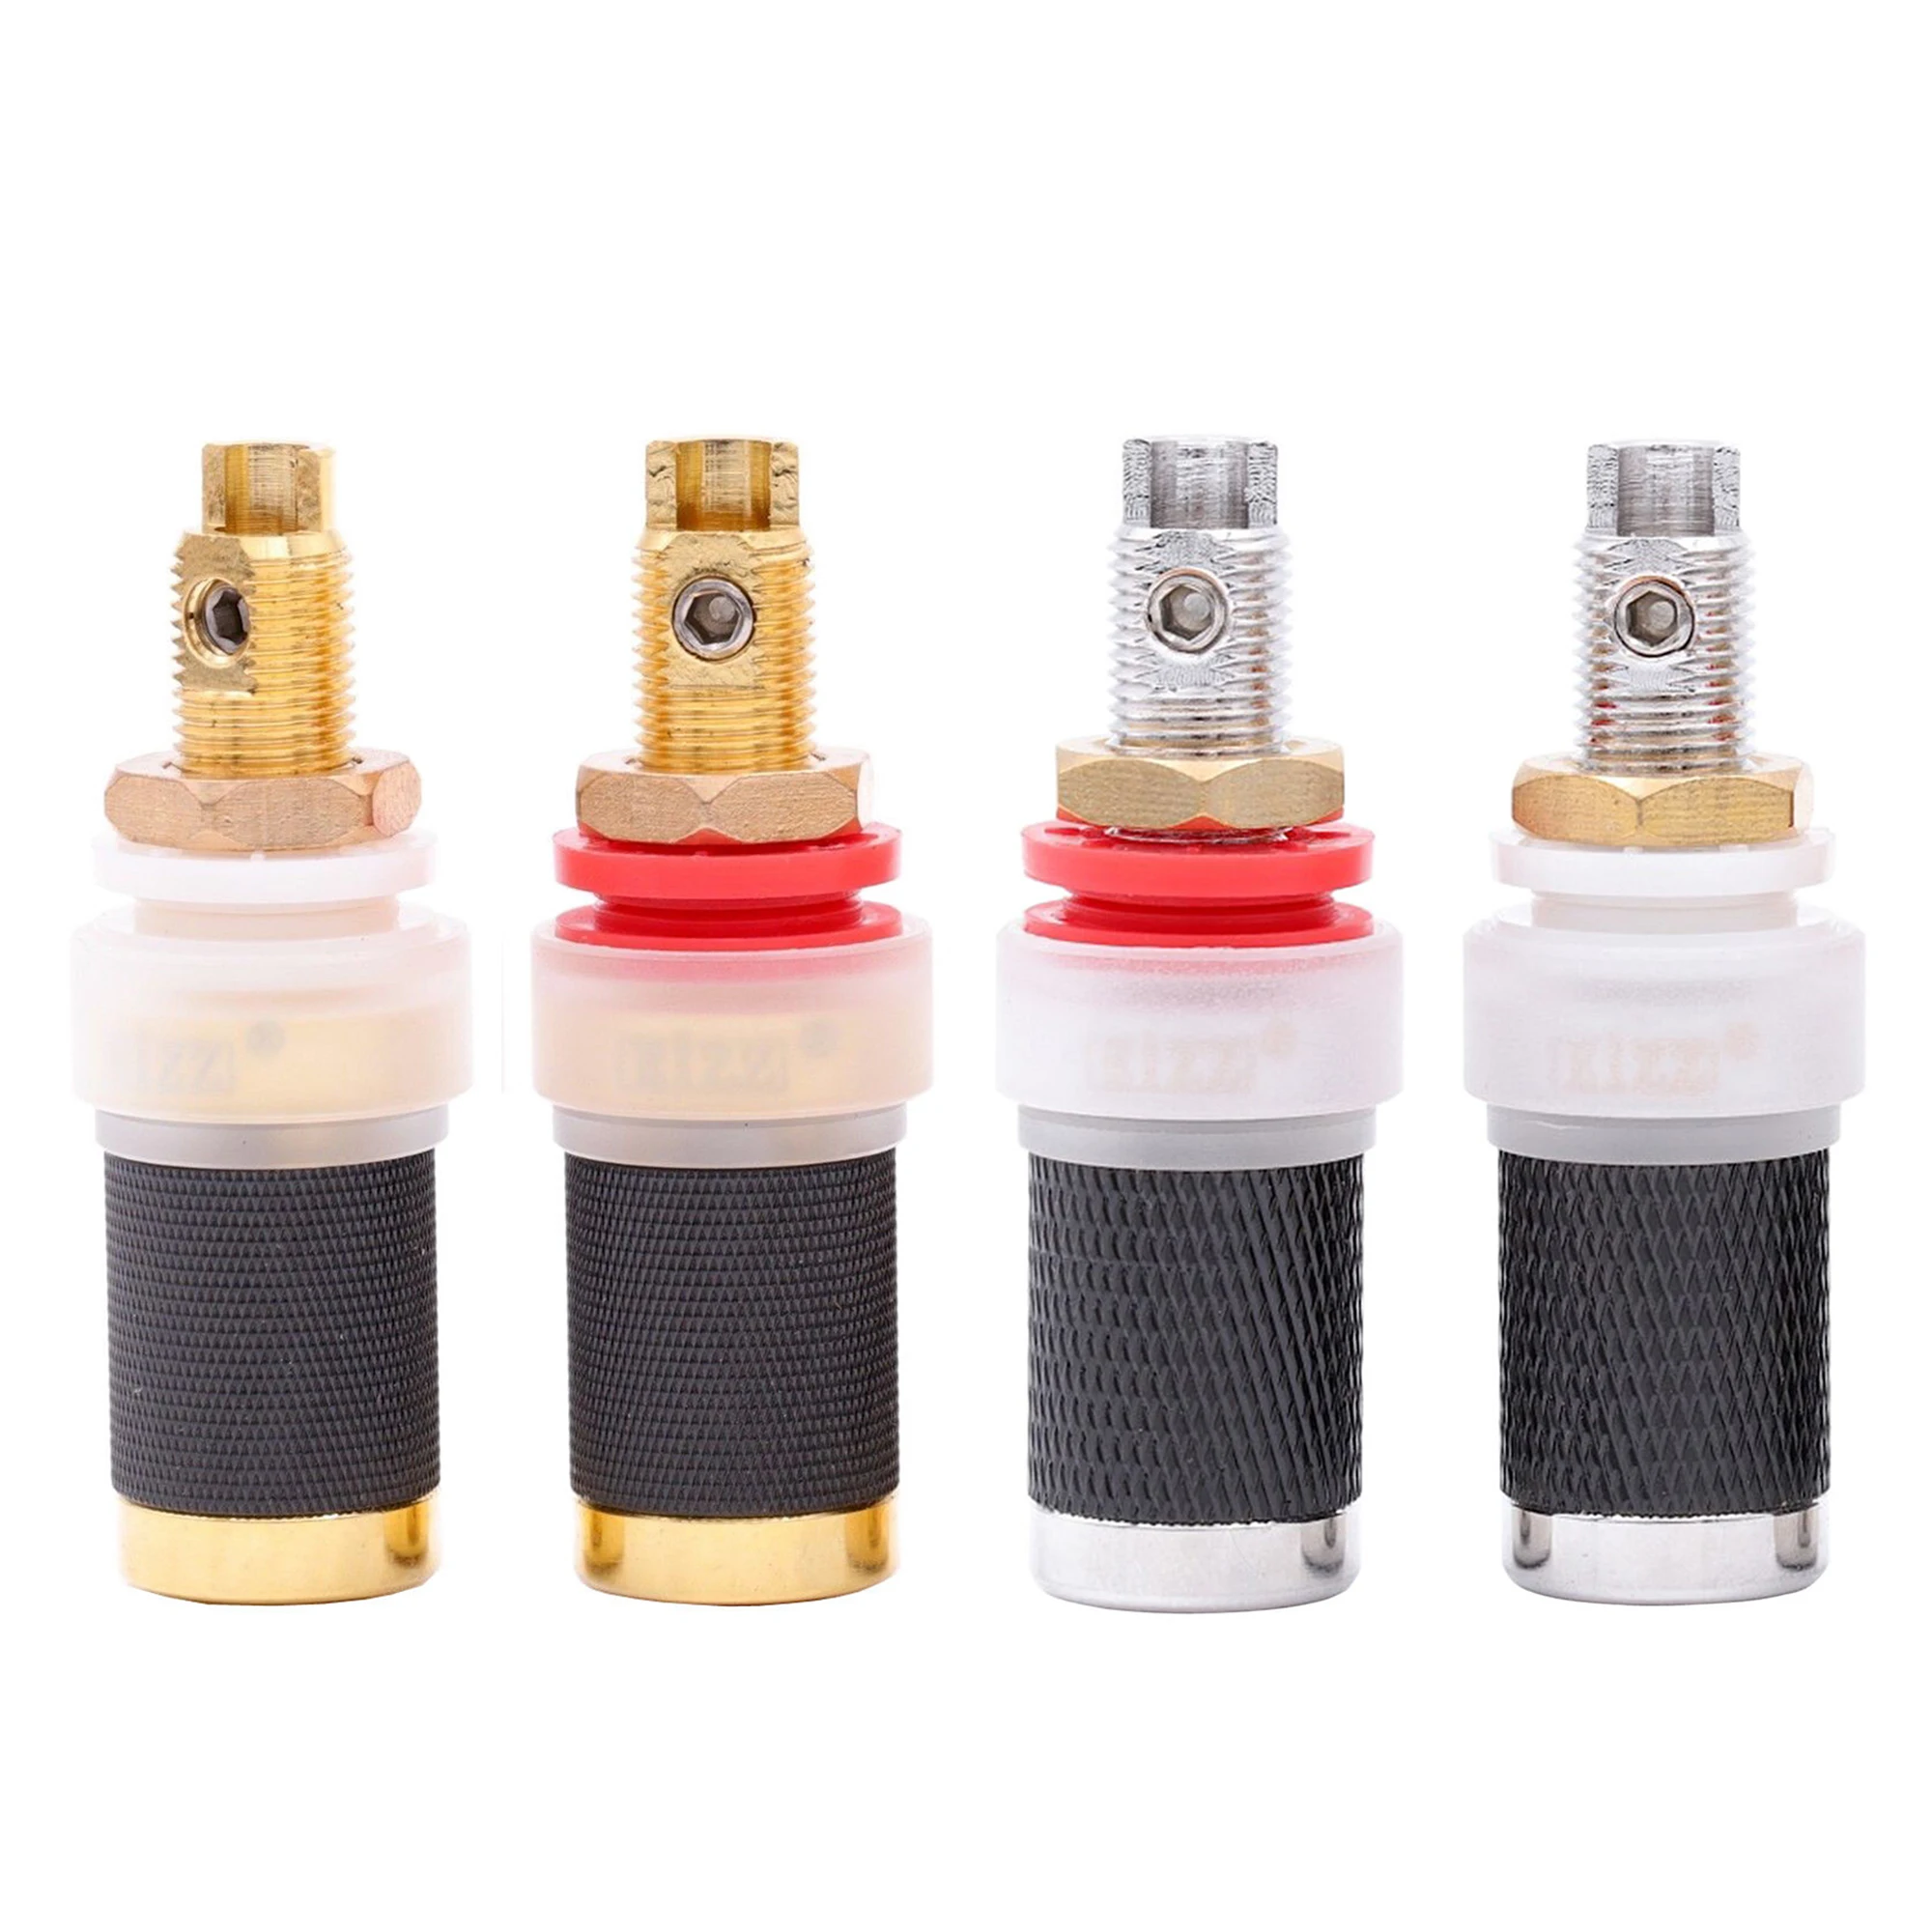 

SPEAKER TERMINAL EIZZ High End Gold Plated/ Rhodium Plated Copper Amplifier Binding Post Banana Plug Jack Socket Audio Connector